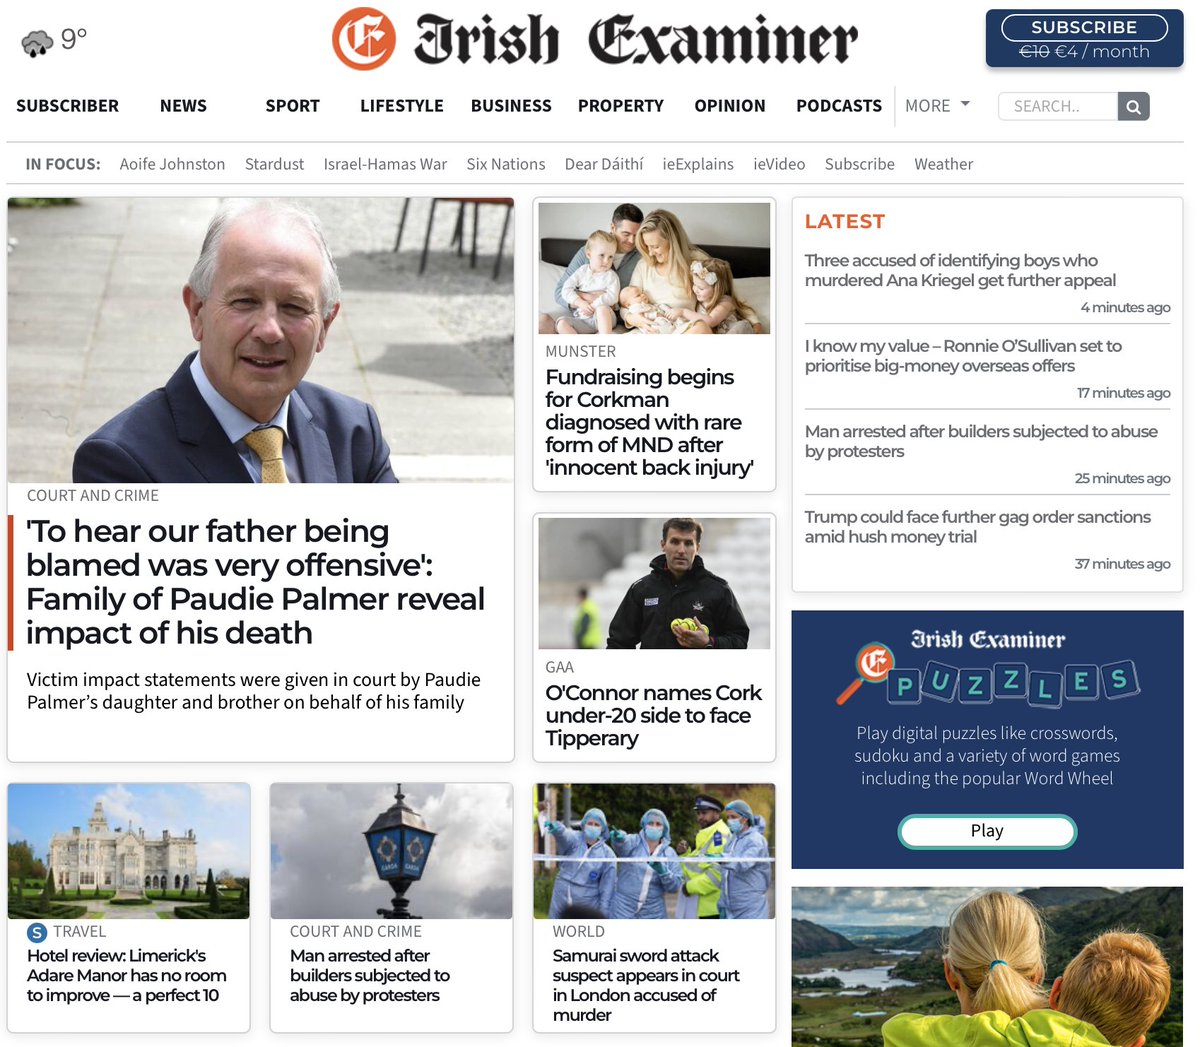 You would think that an important symbolic date such as Ireland's Overshoot Day warrants a headline feature. You would be mistaken. The Irish media's coverage of the #ClimateCrisis and #BiodiversityCrisis remains poor.